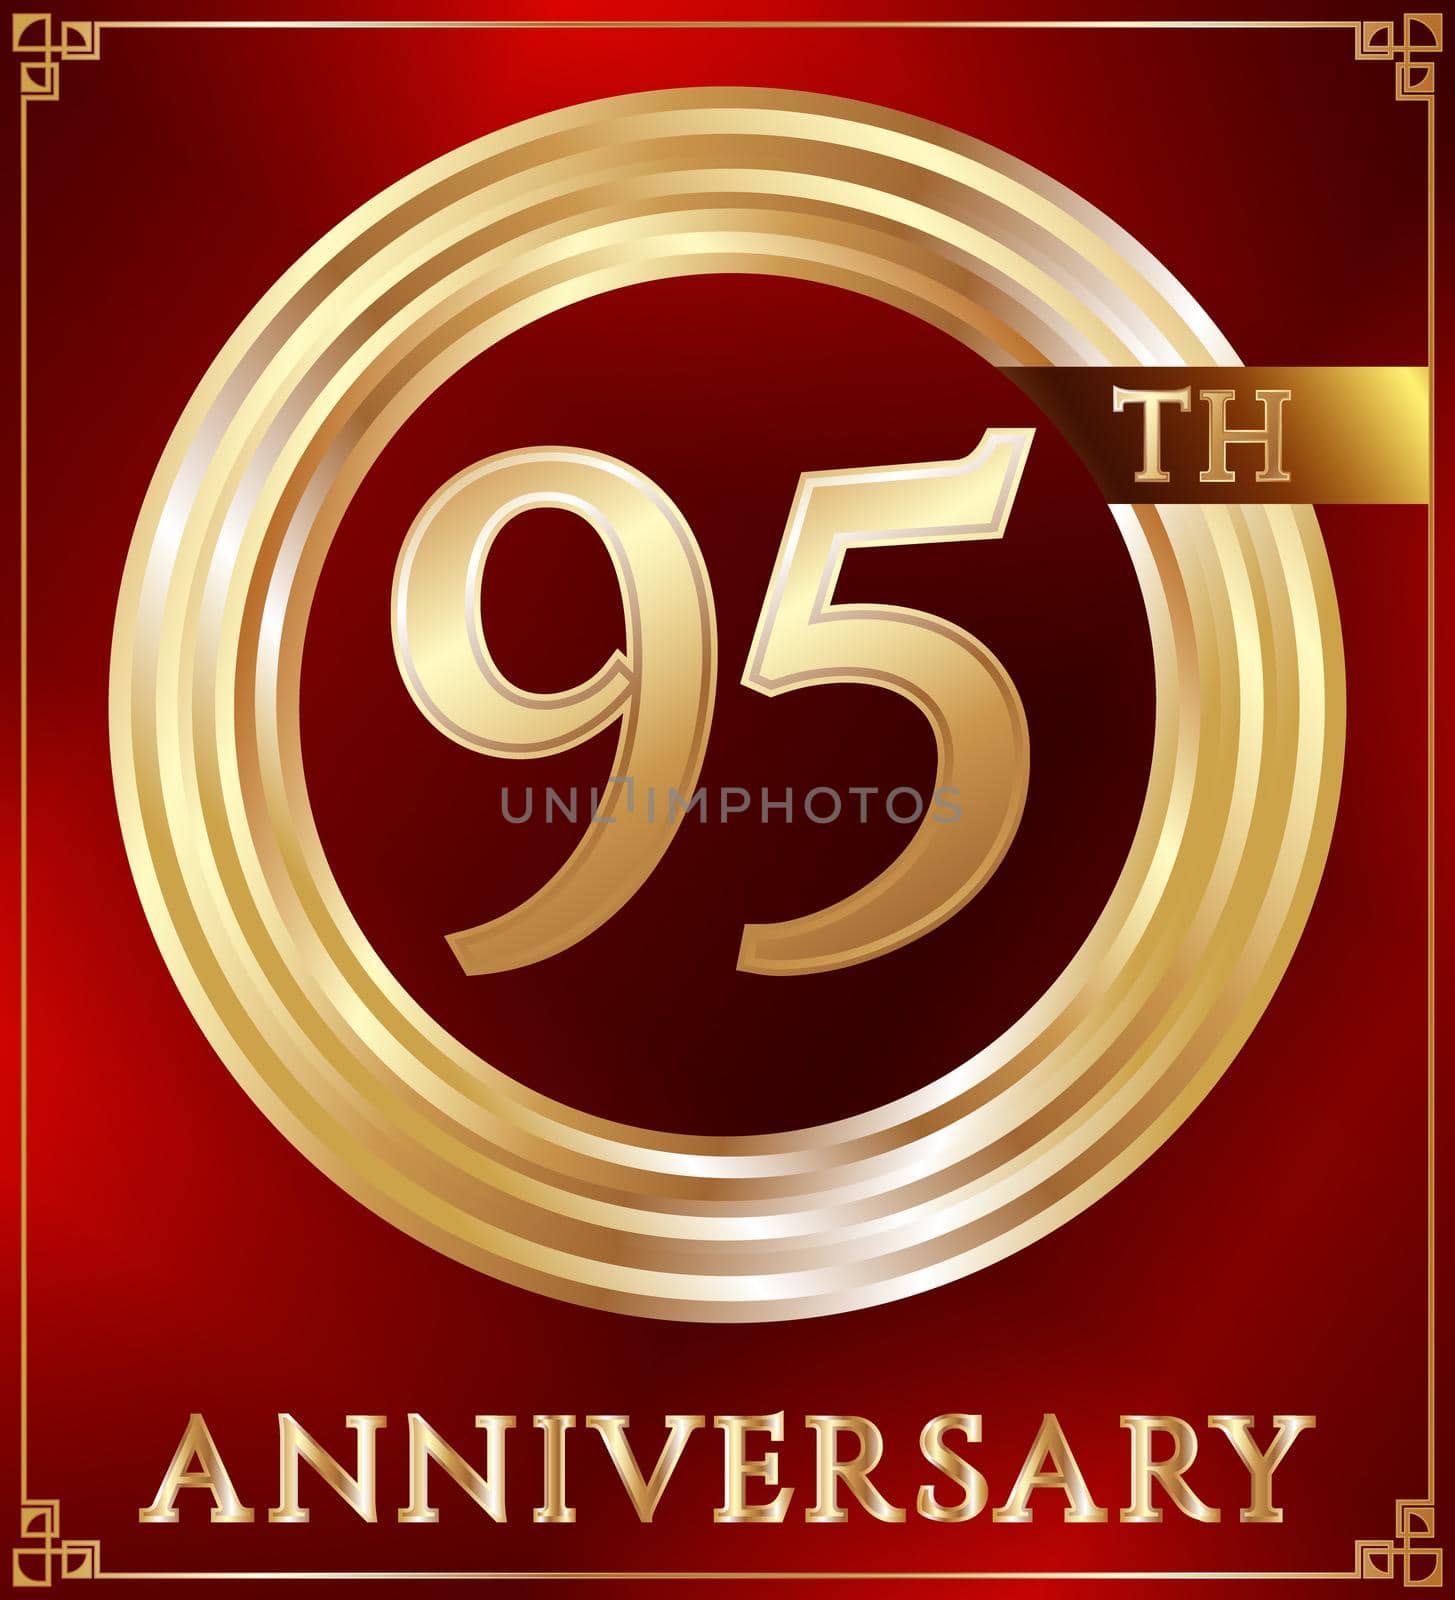 Anniversary gold ring logo number 95. Anniversary card. Red background. Vector illustration.